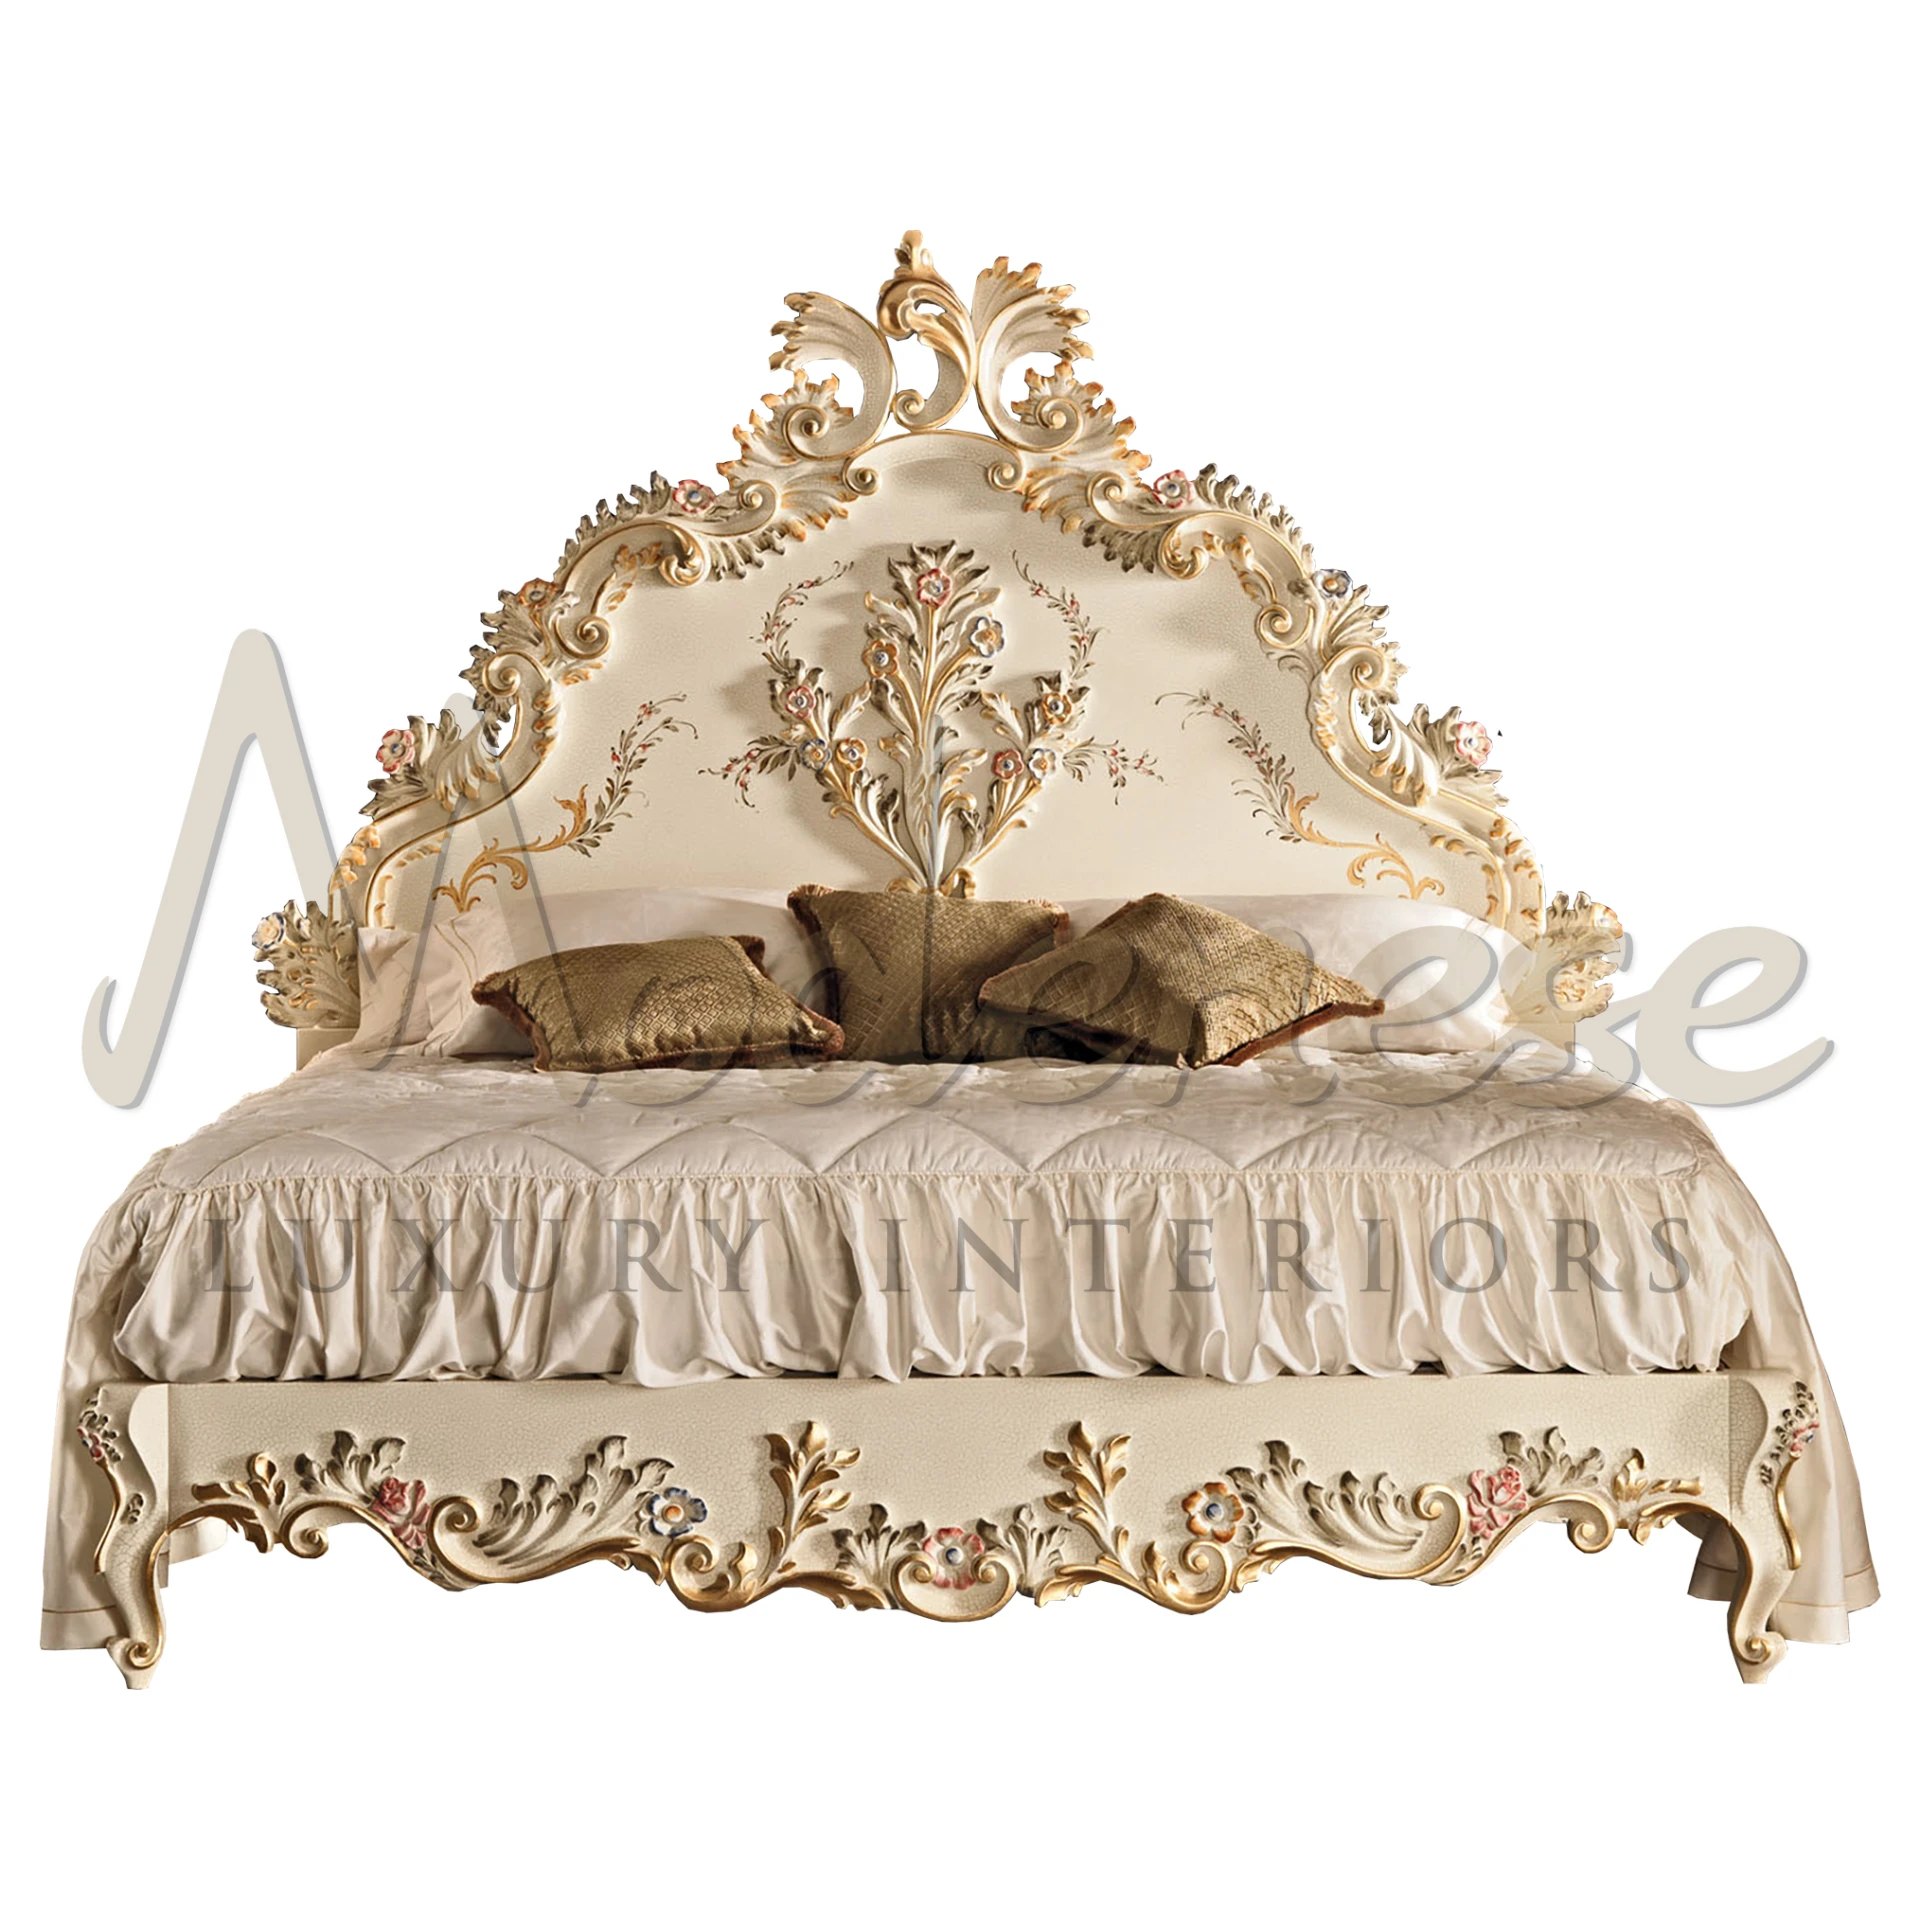 An exquisite bed with an elaborate cream and gold headboard featuring ornamental carvings and floral accents, complemented by plush golden pillows and a ruffled bedspread.